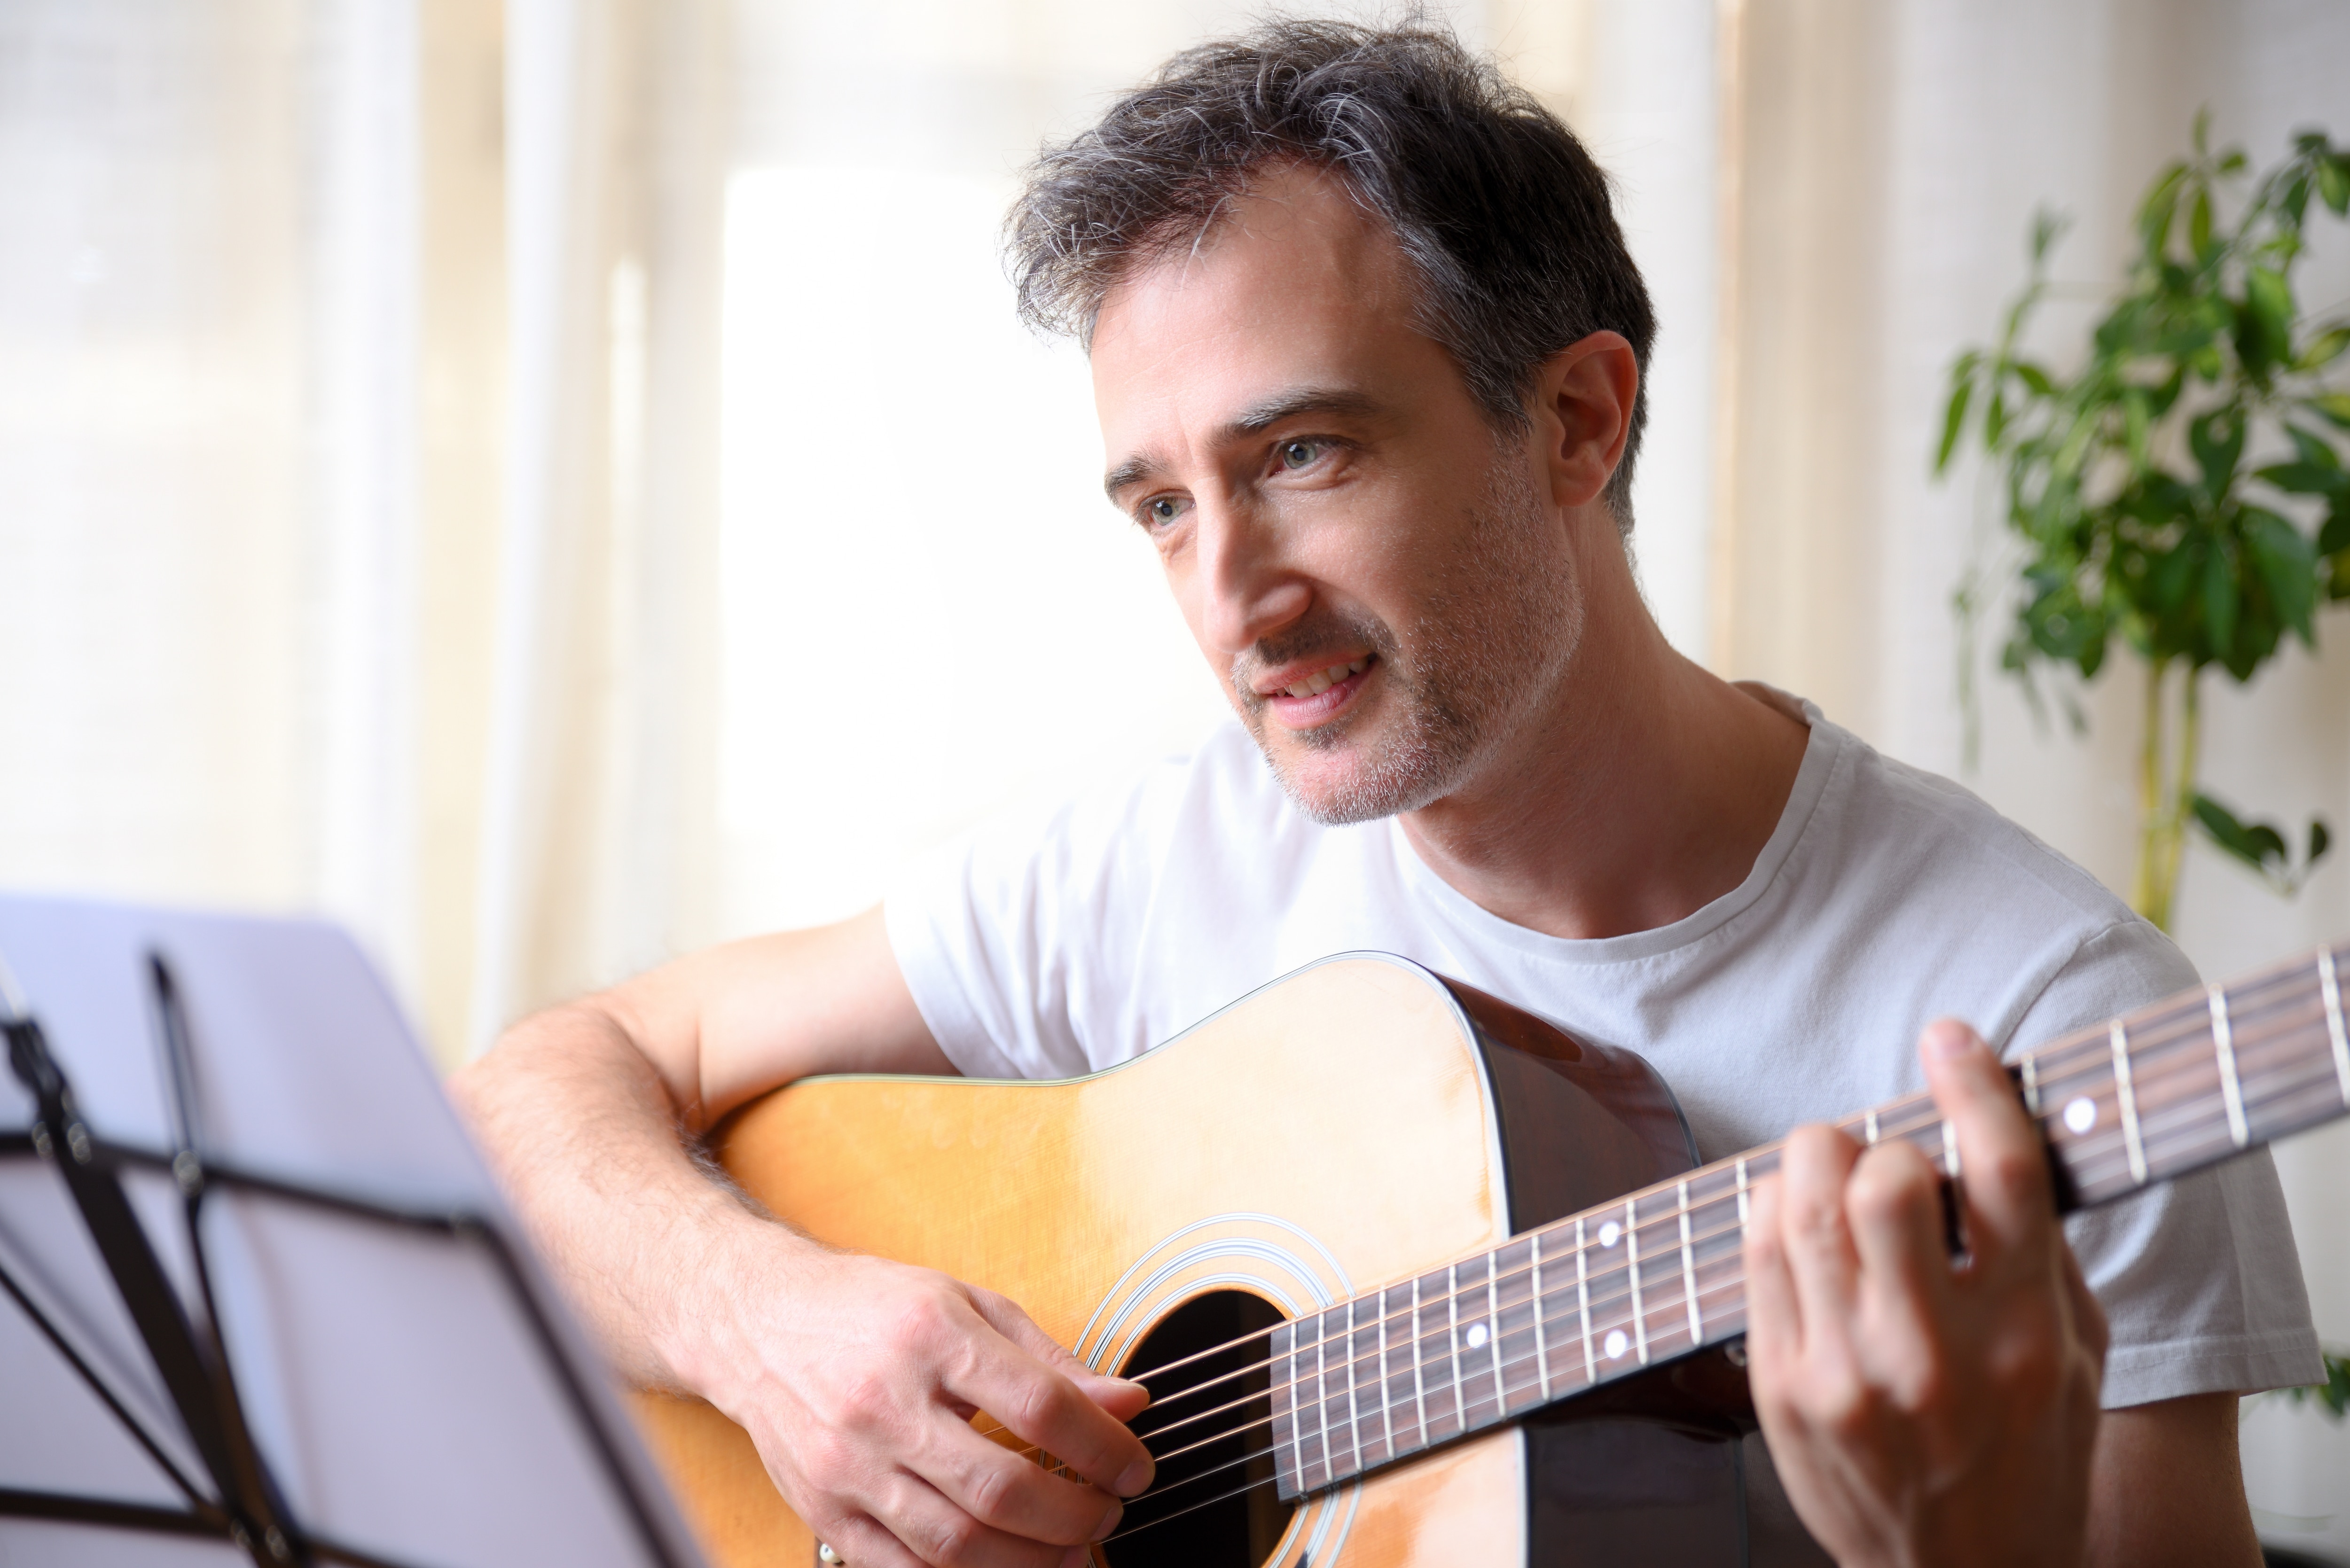 [RS+] How Much Do Guitar Lessons Cost? SEO ARTICLE - What is the average cost of guitar lessons?